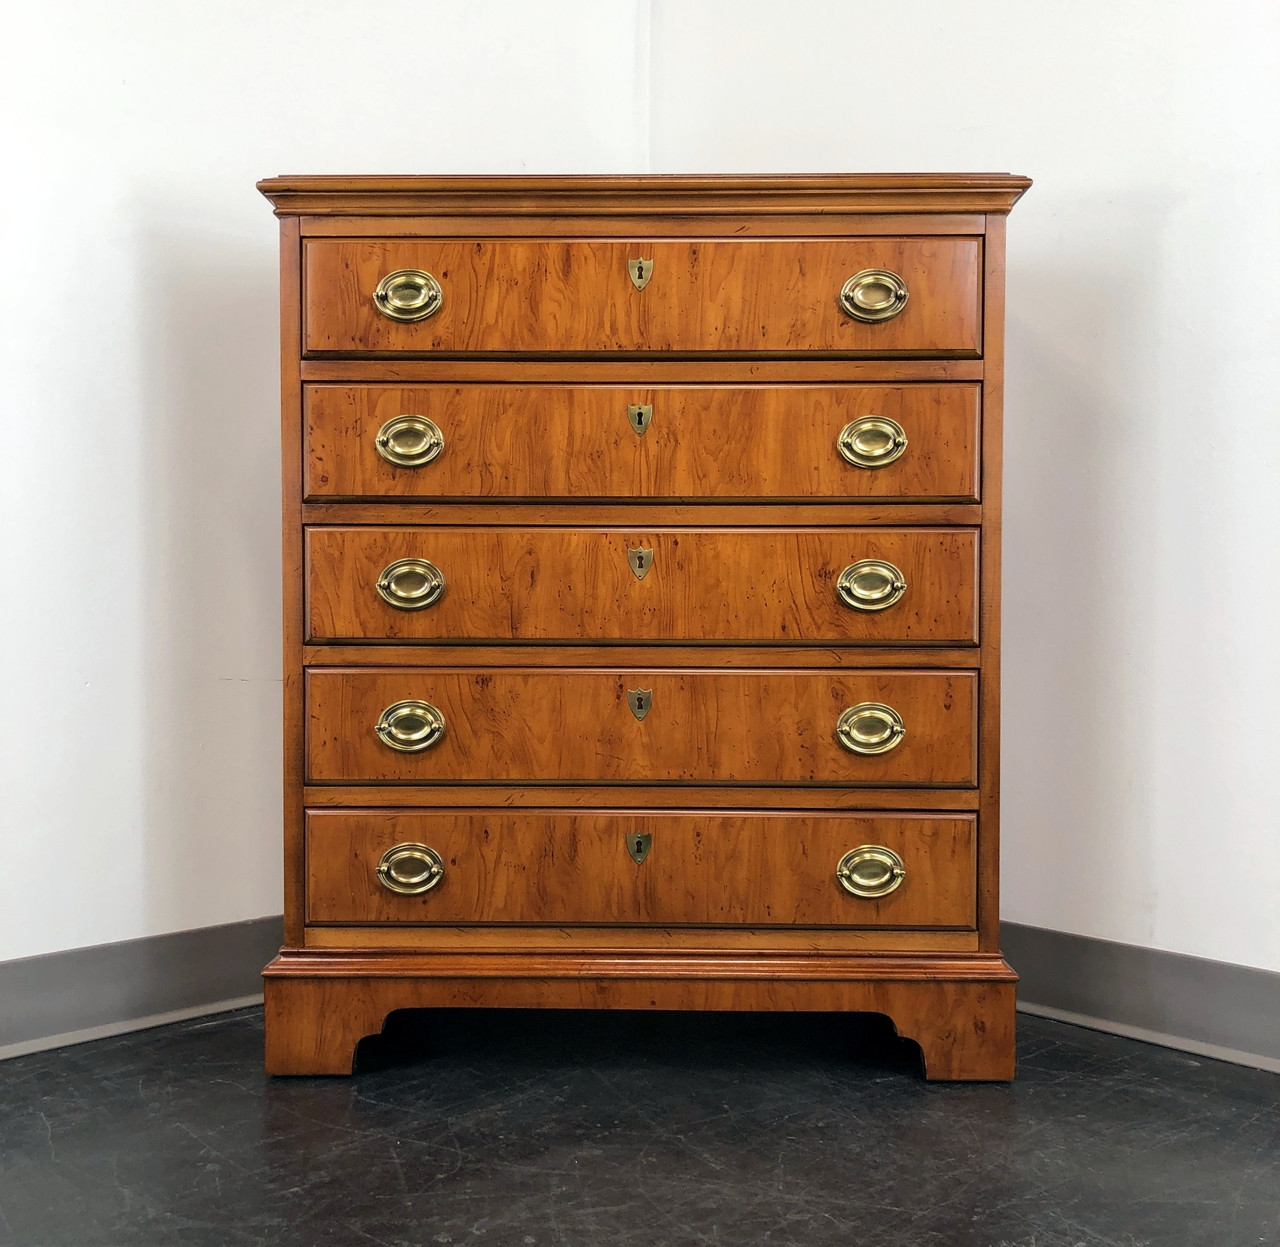 Sold Drexel Heritage Yorkshire Georgian Style Yew Wood Narrow Bachelor Chest